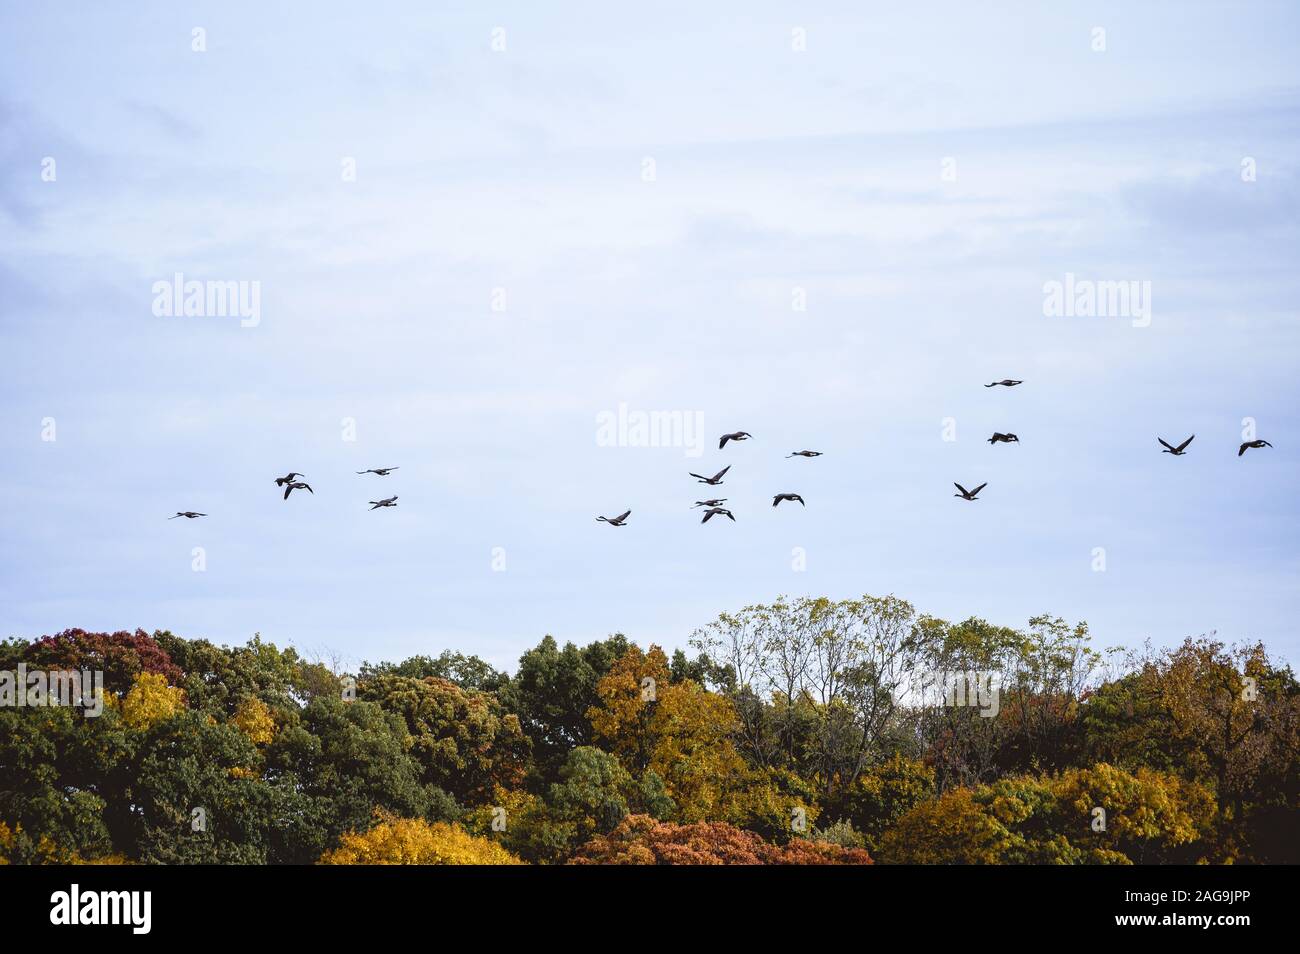 Beautiful shot of birds flying over trees with a blue sky in the background  Stock Photo - Alamy